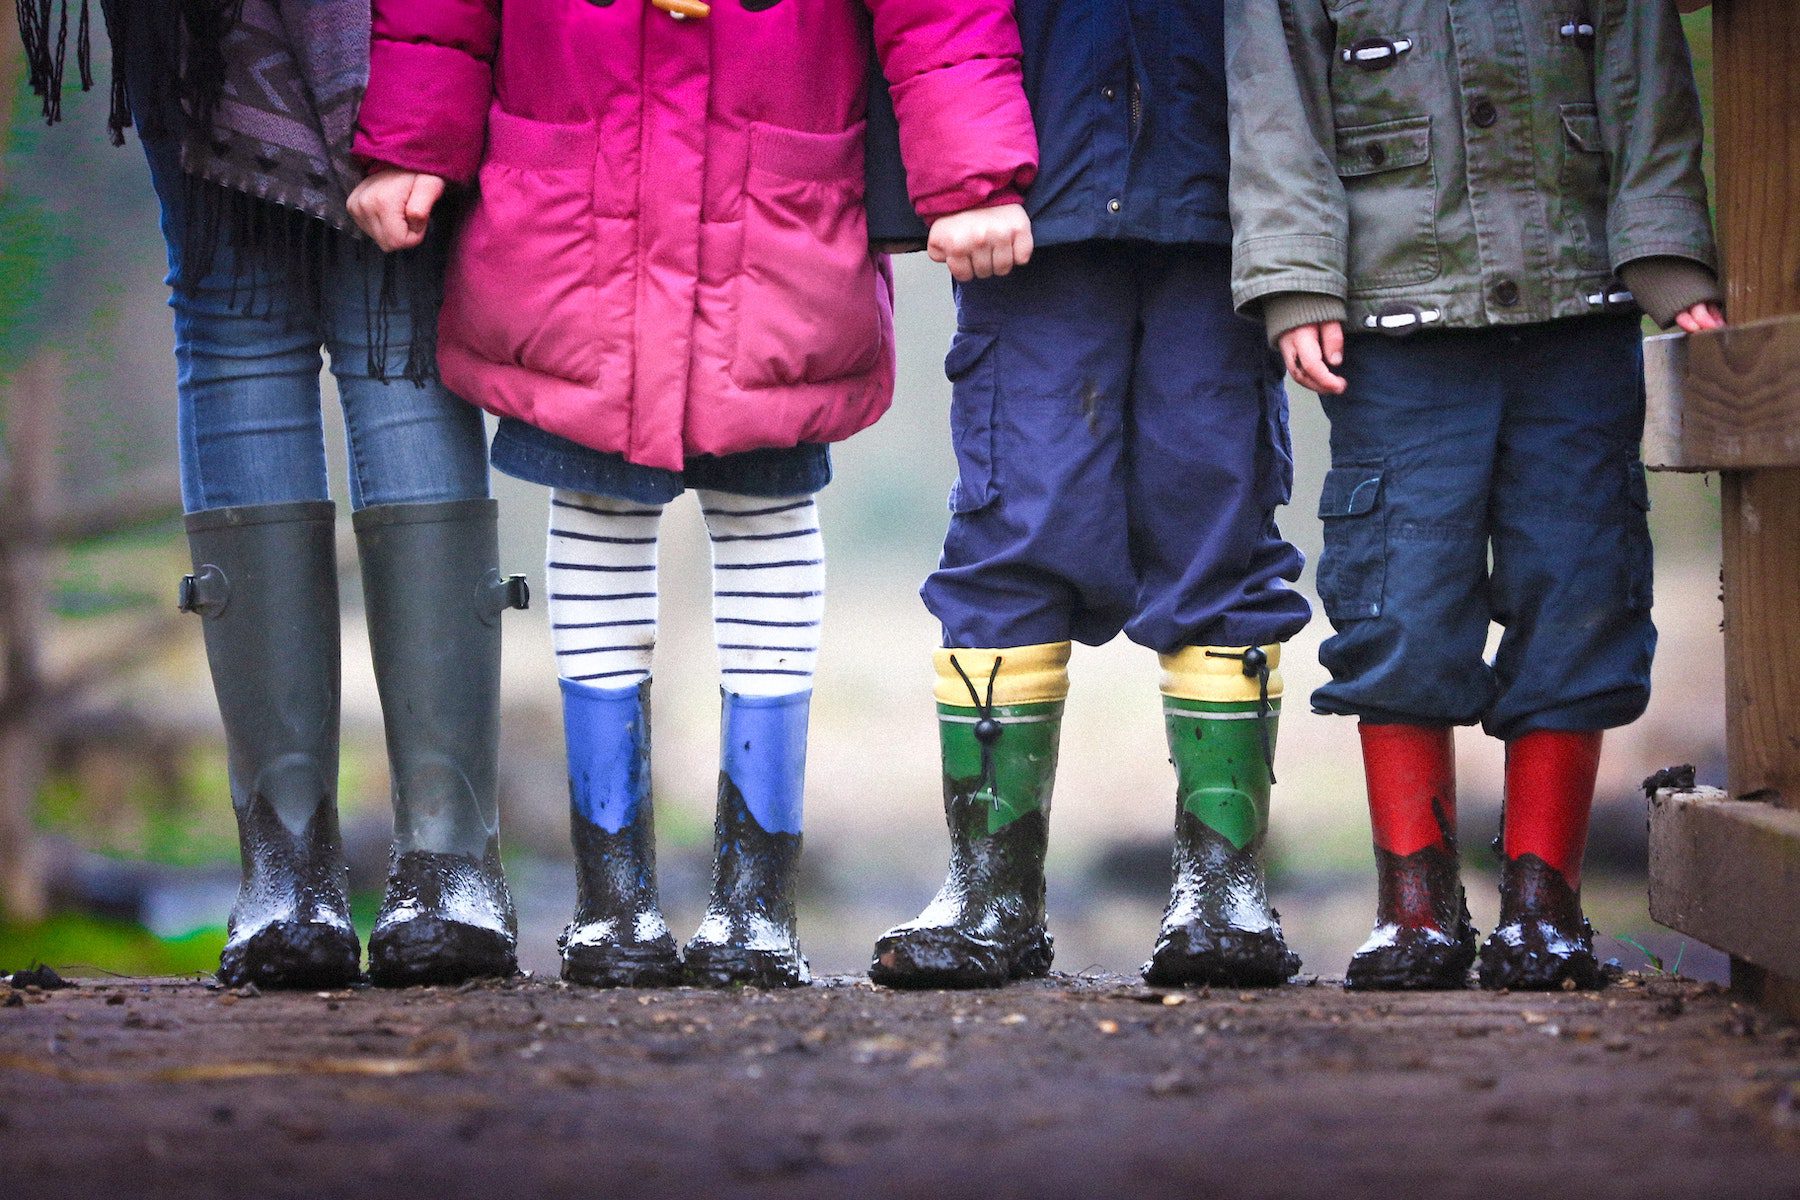 Four children in rainboots and colorful jackets hold hands, only visible up to their chests. 